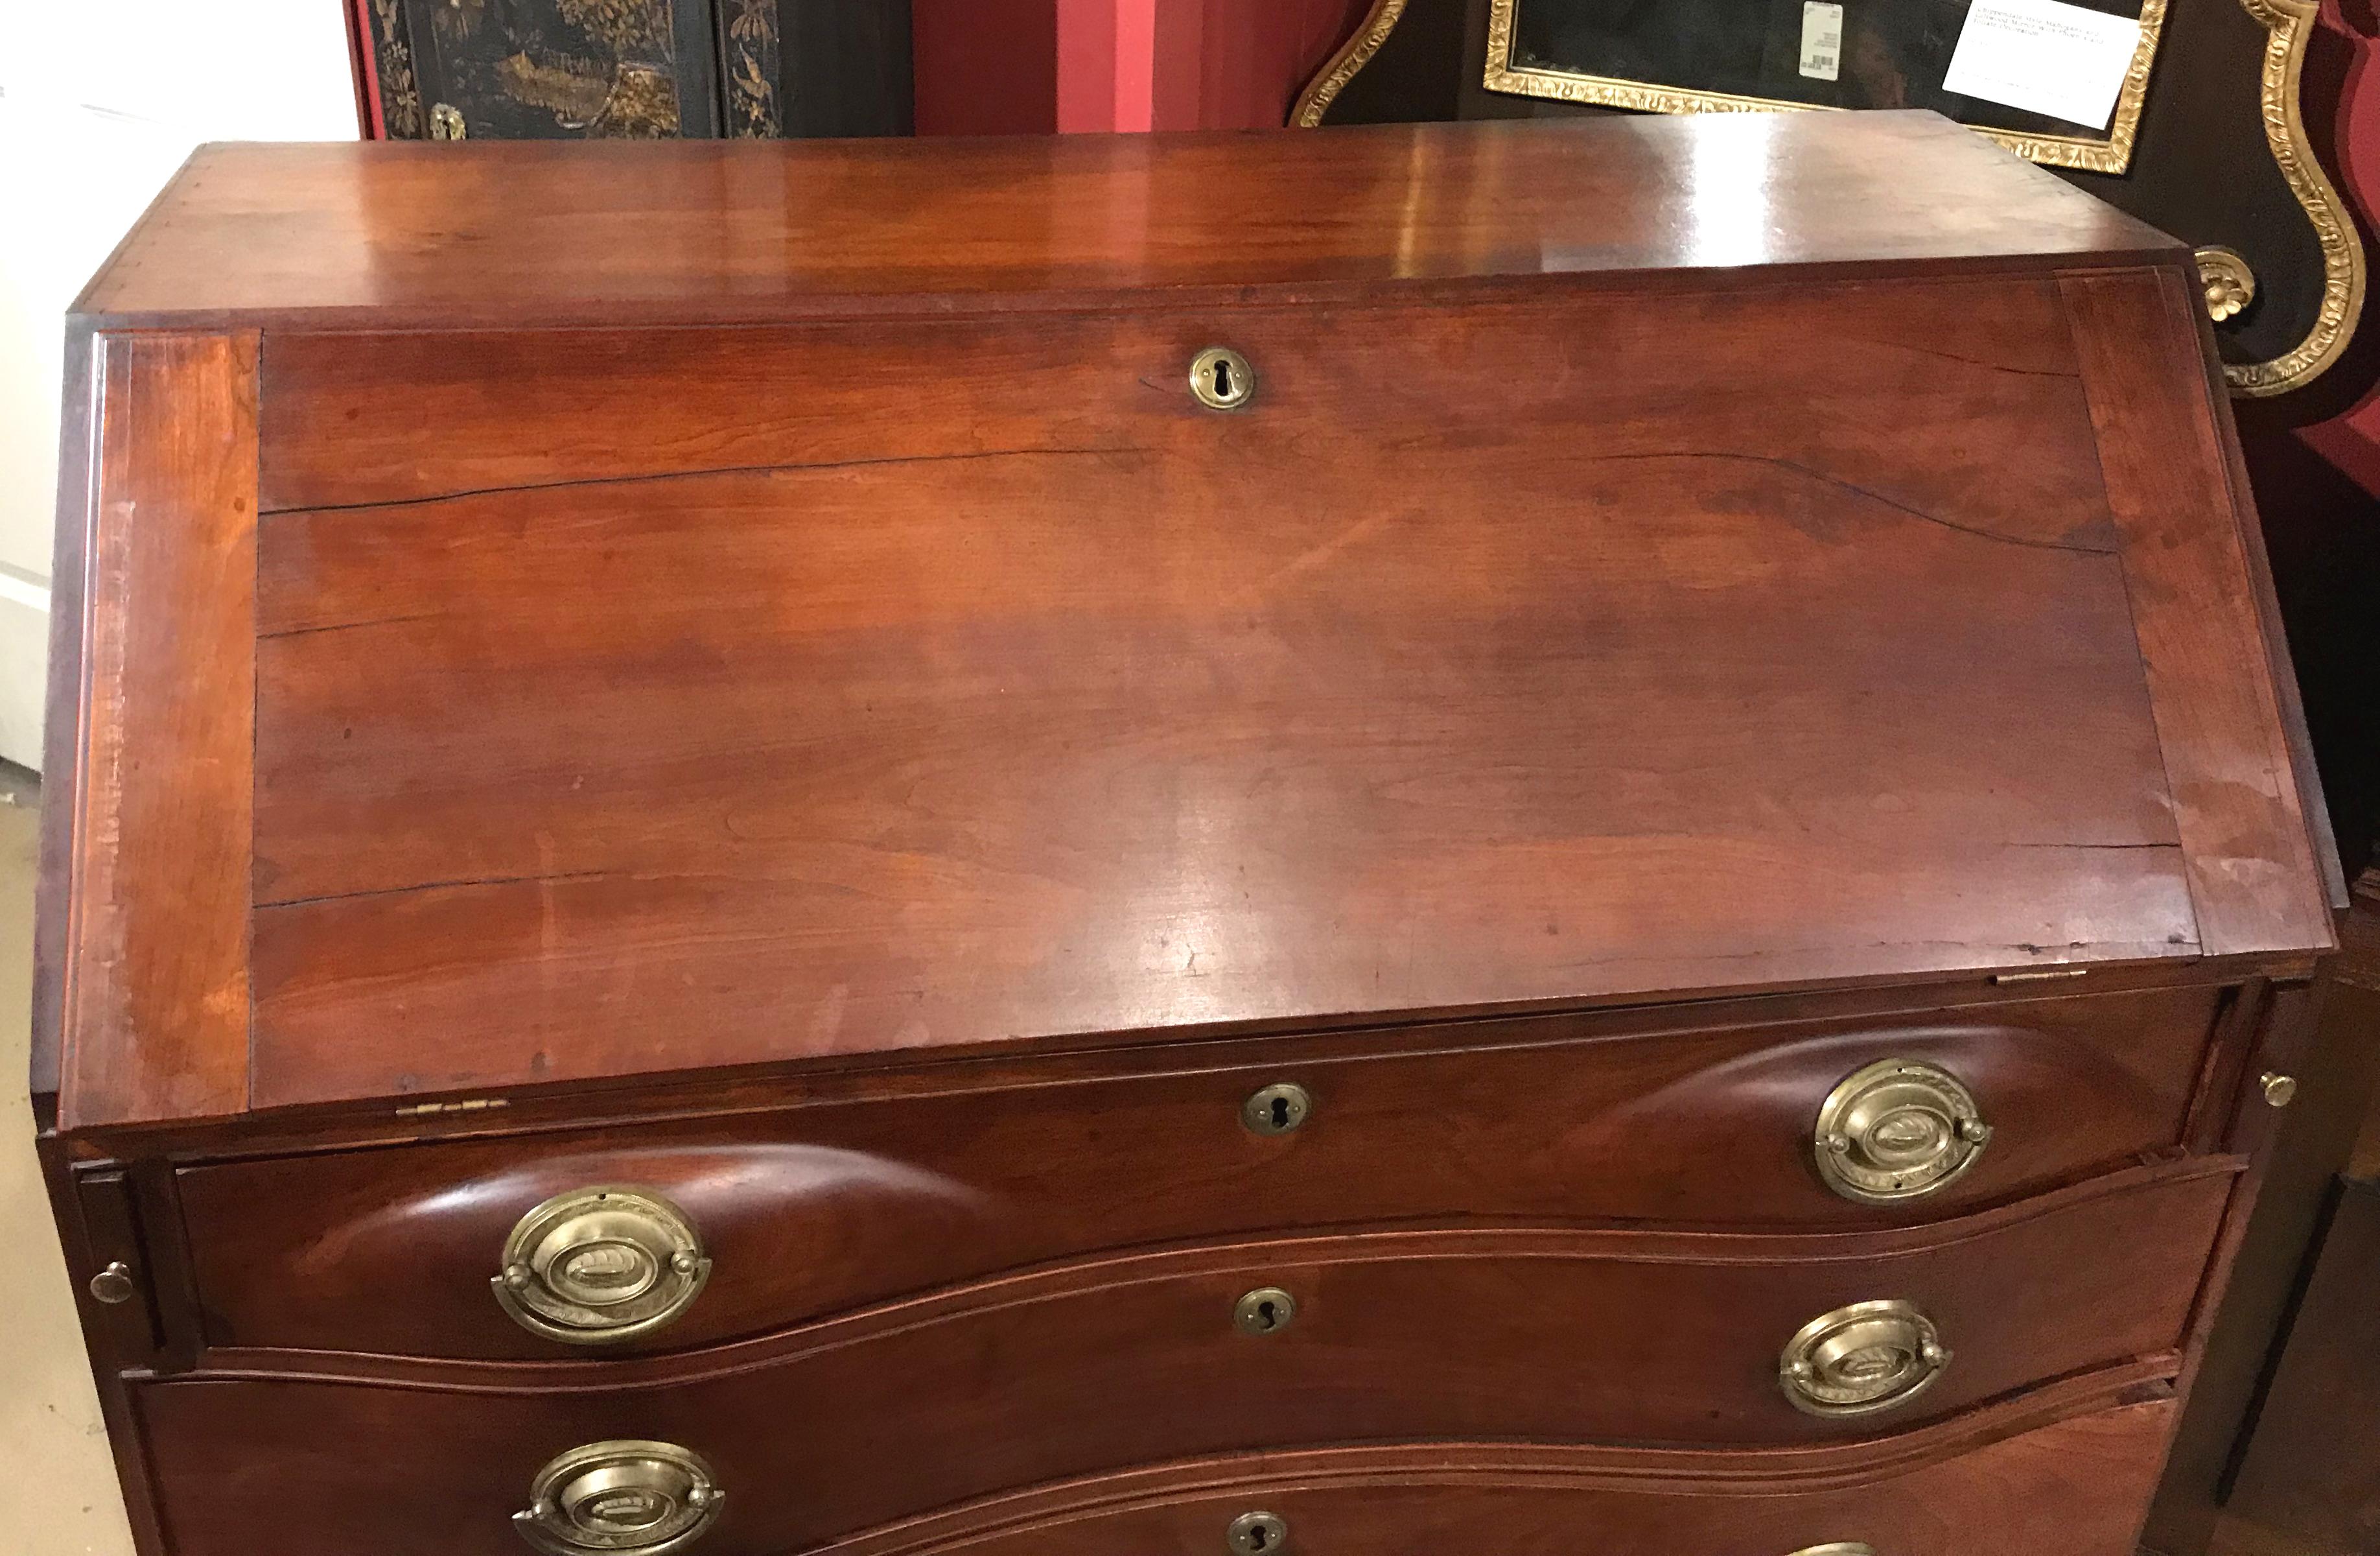 A fine Chippendale cherry oxbow slant front desk with compartmentalized interior over four conforming graduated drawers with replaced oval period brasses, all supported by four nicely carved bracket feet. New England in origin, dating to the late